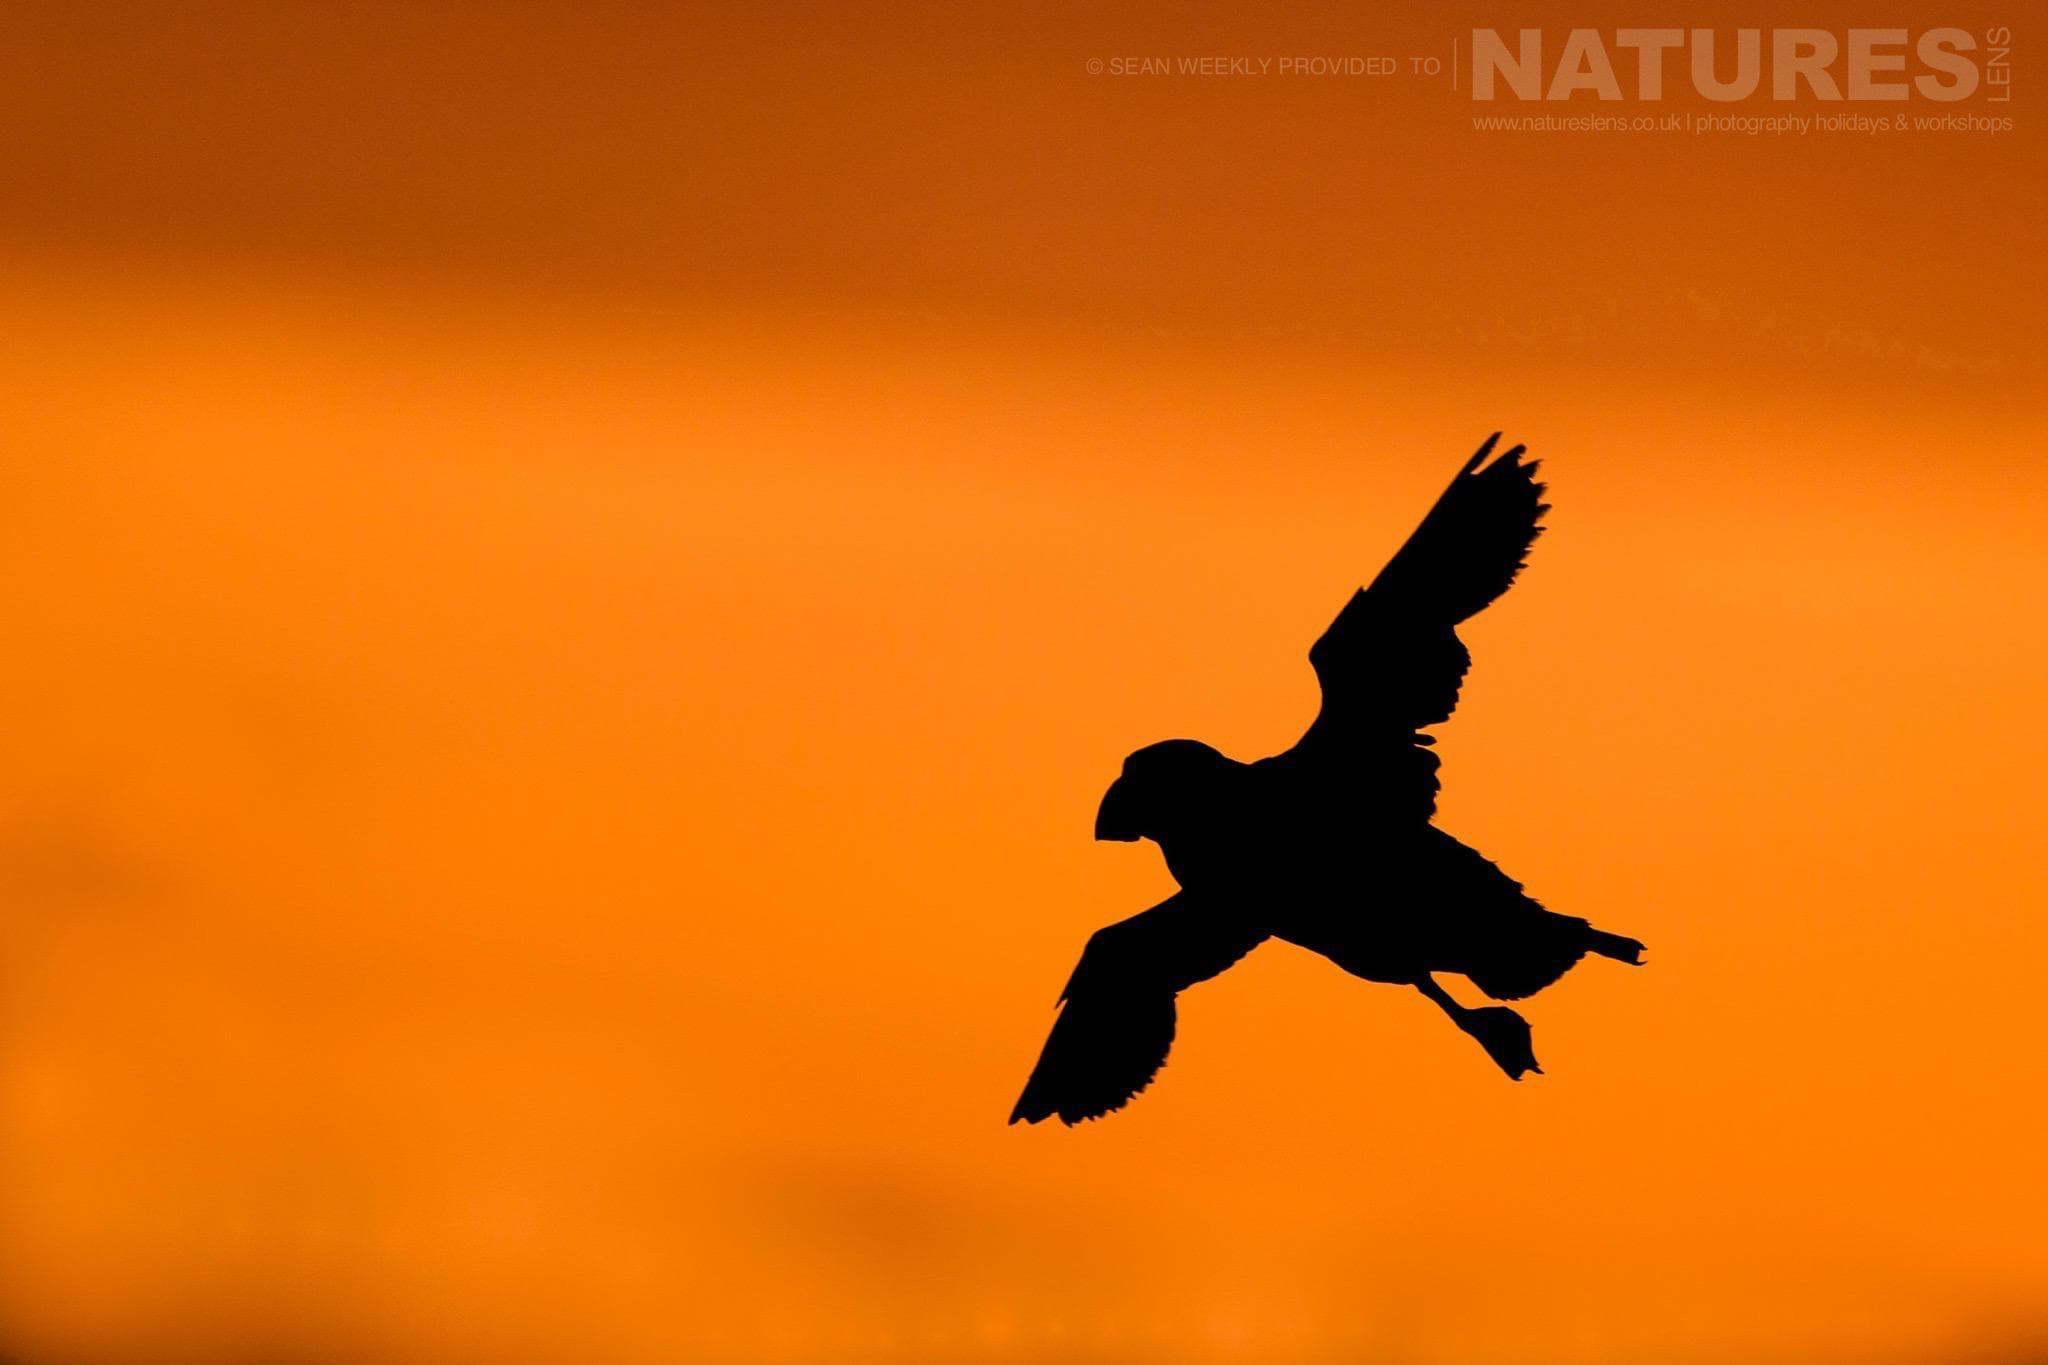 One of the Puffins of Skomer takes fligh silhouetted against the evening sky an example of photography at the end of the day on Skomer Island.jpg